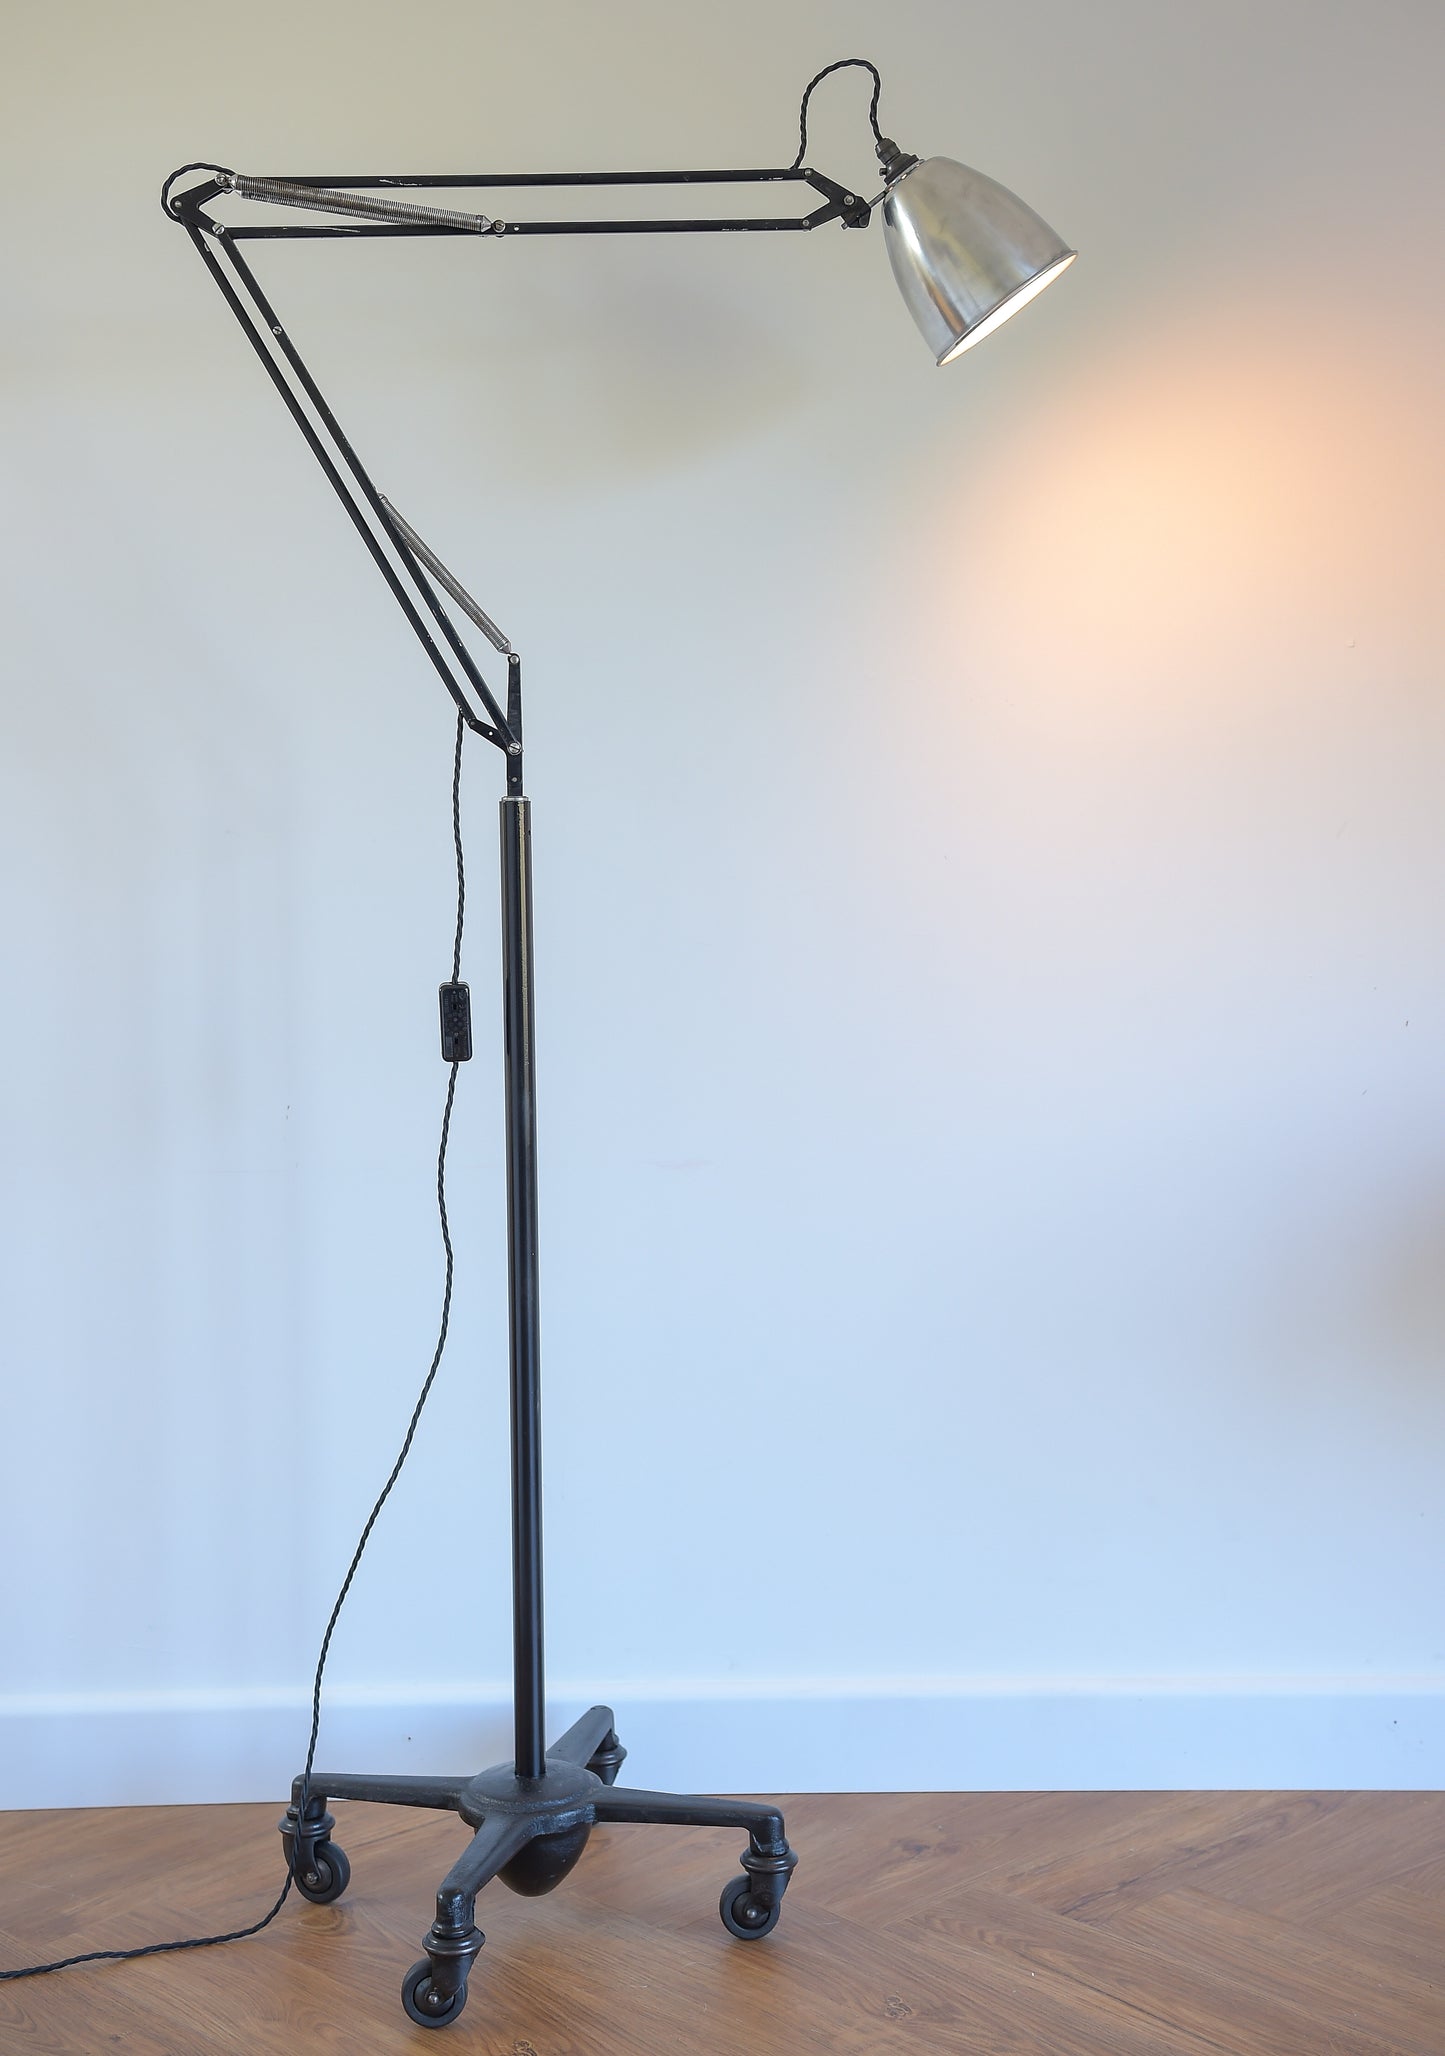 Anglepoise Trolley Lamp Designed By George Cawardine. English 1950's